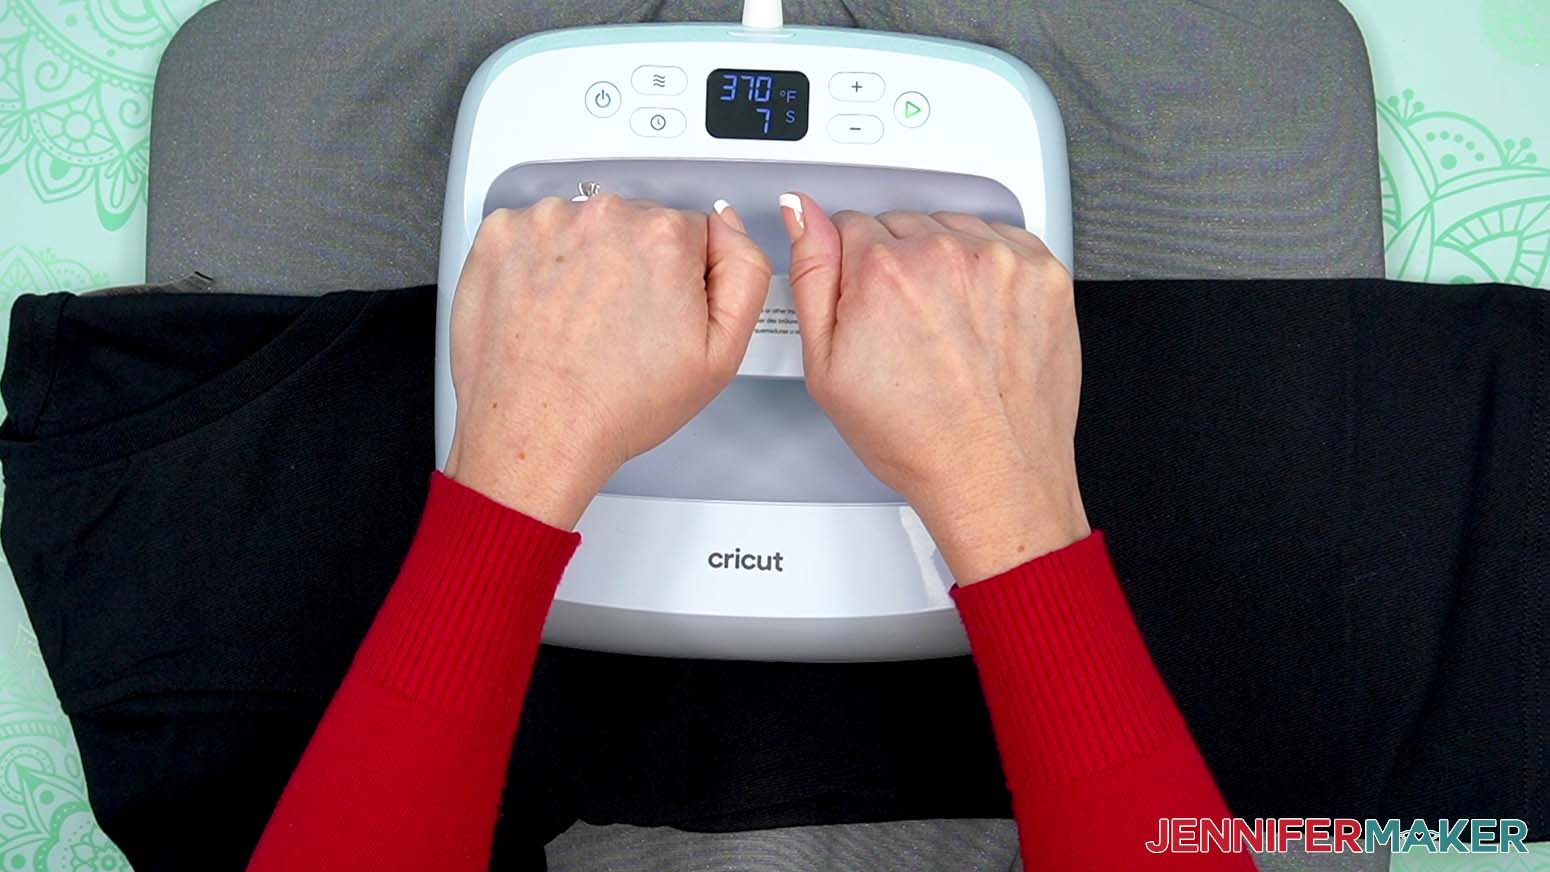 When the machine comes to temperature, fold the shirt in half the long way and press it for 10 seconds with medium pressure to remove moisture and create a center crease.